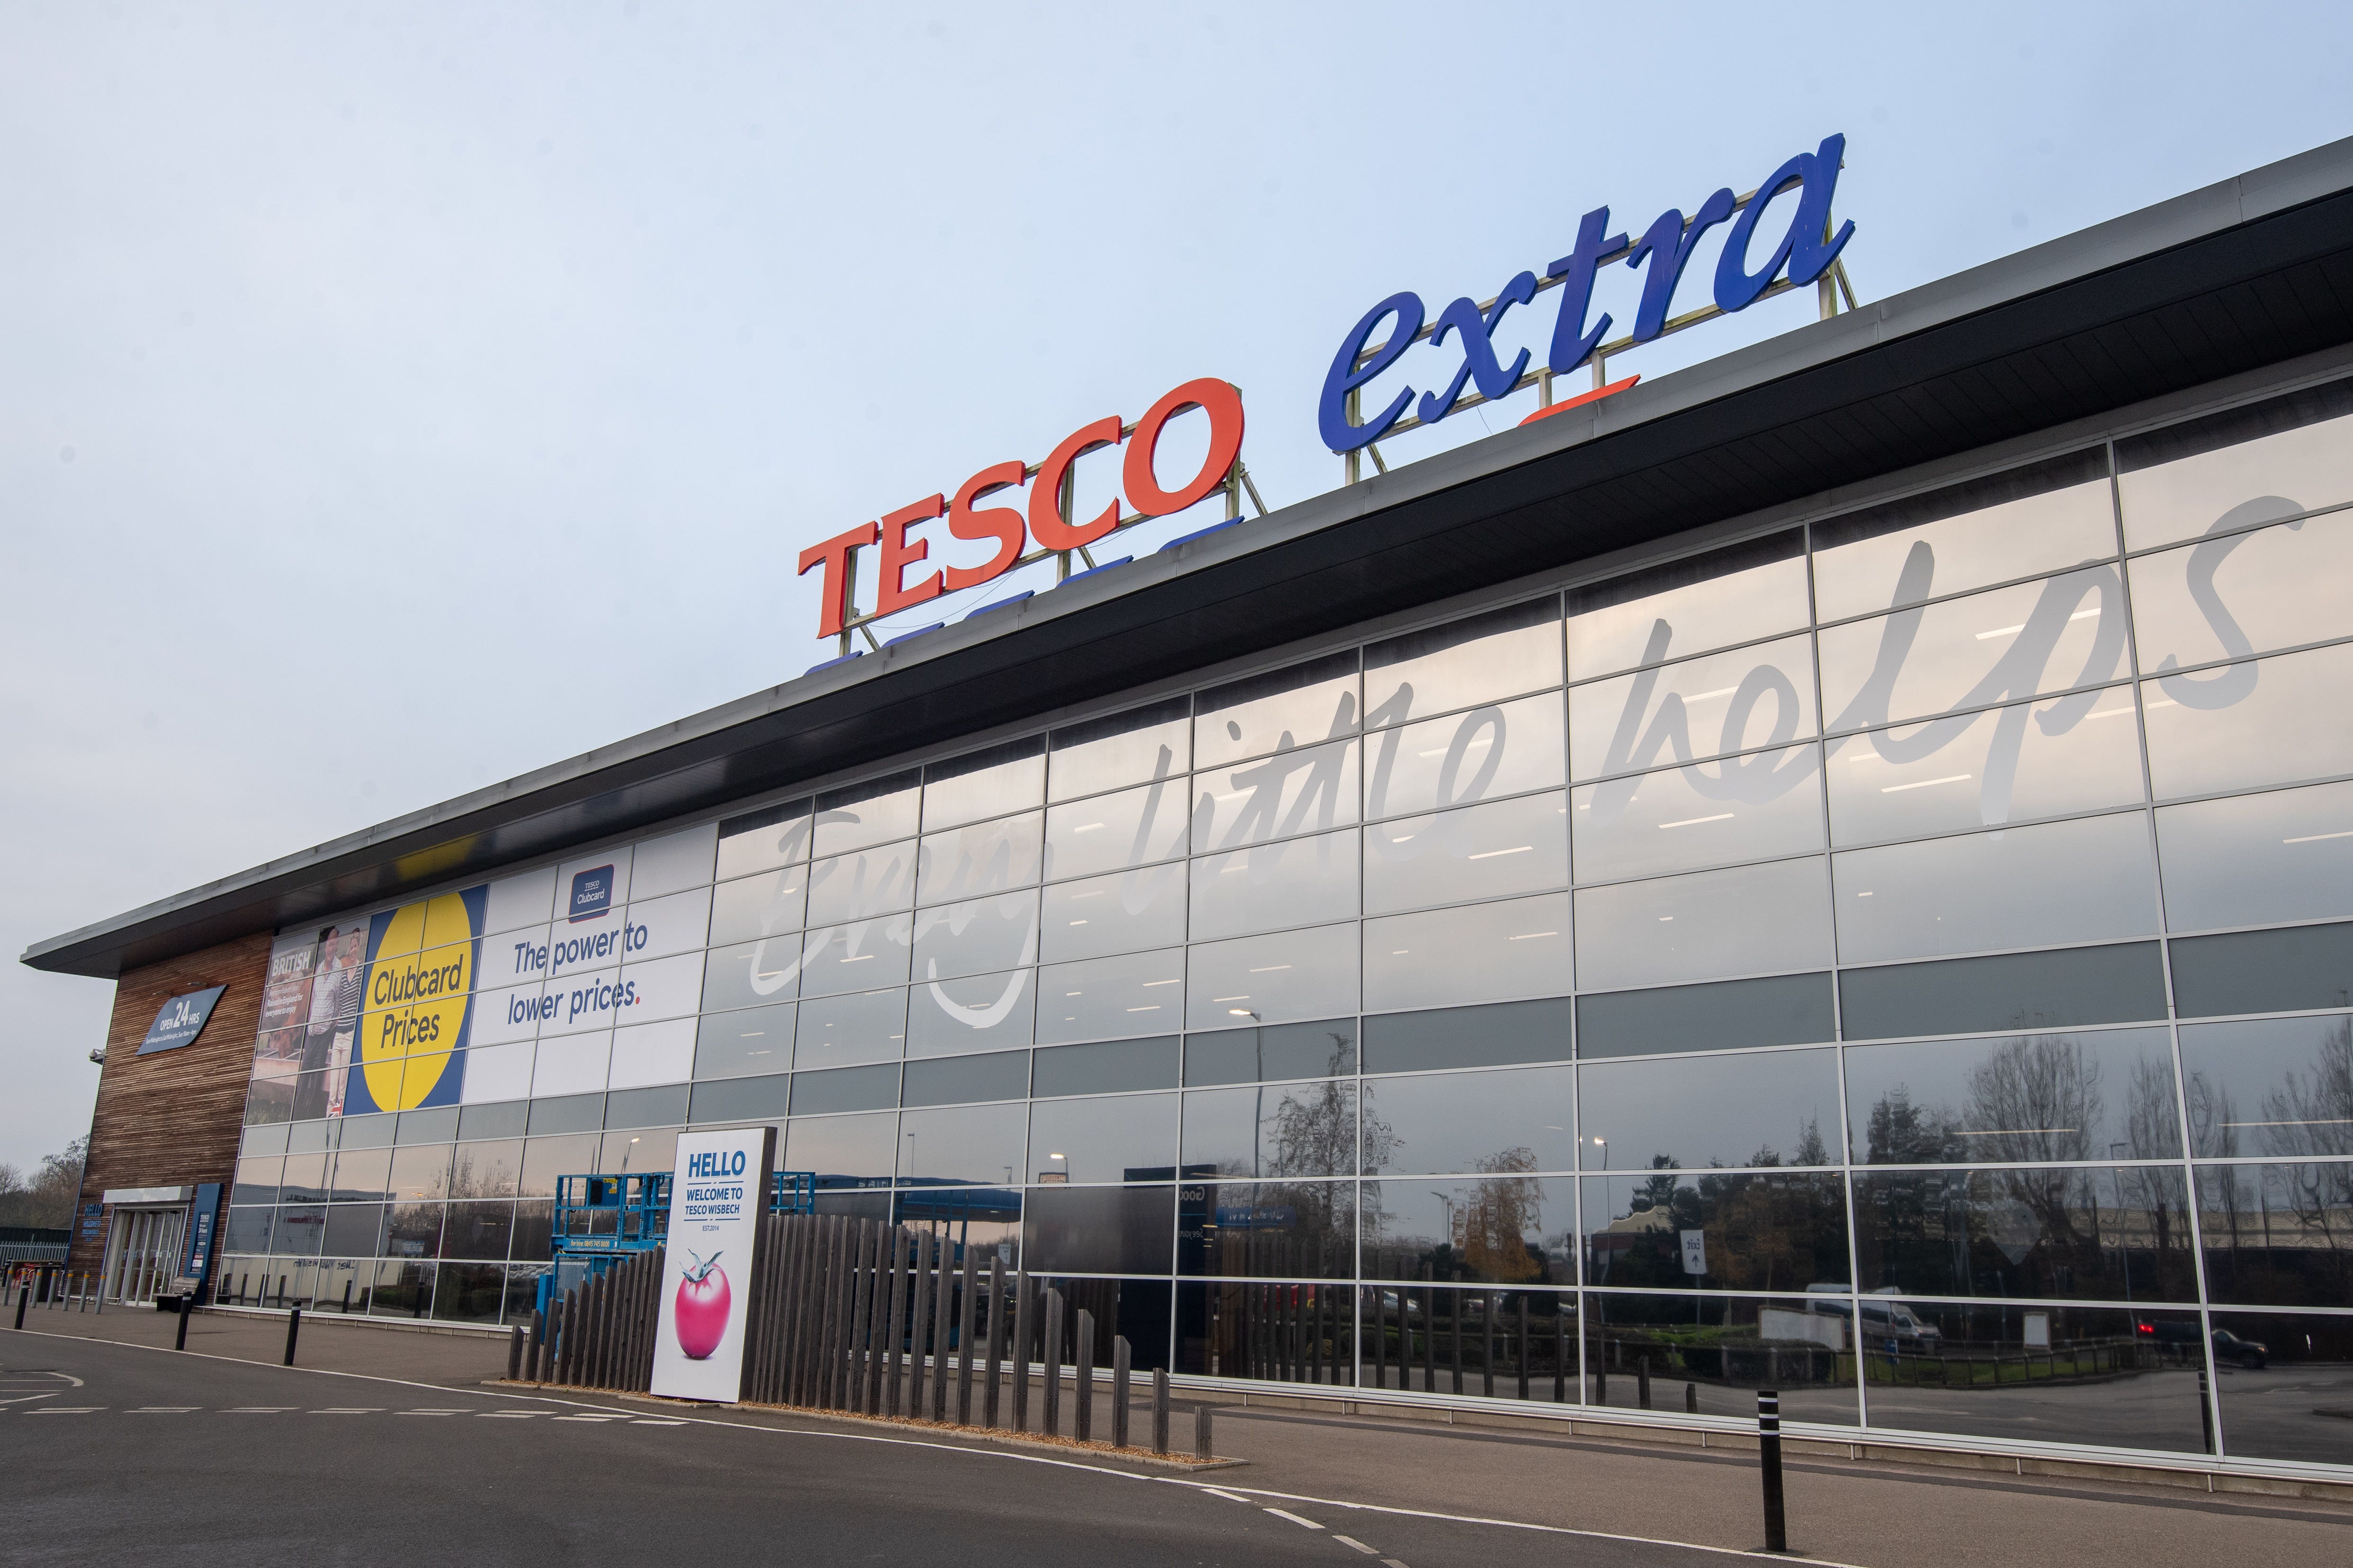 Tesco has said its profits are set to surpass previous targets after strong Christmas sales